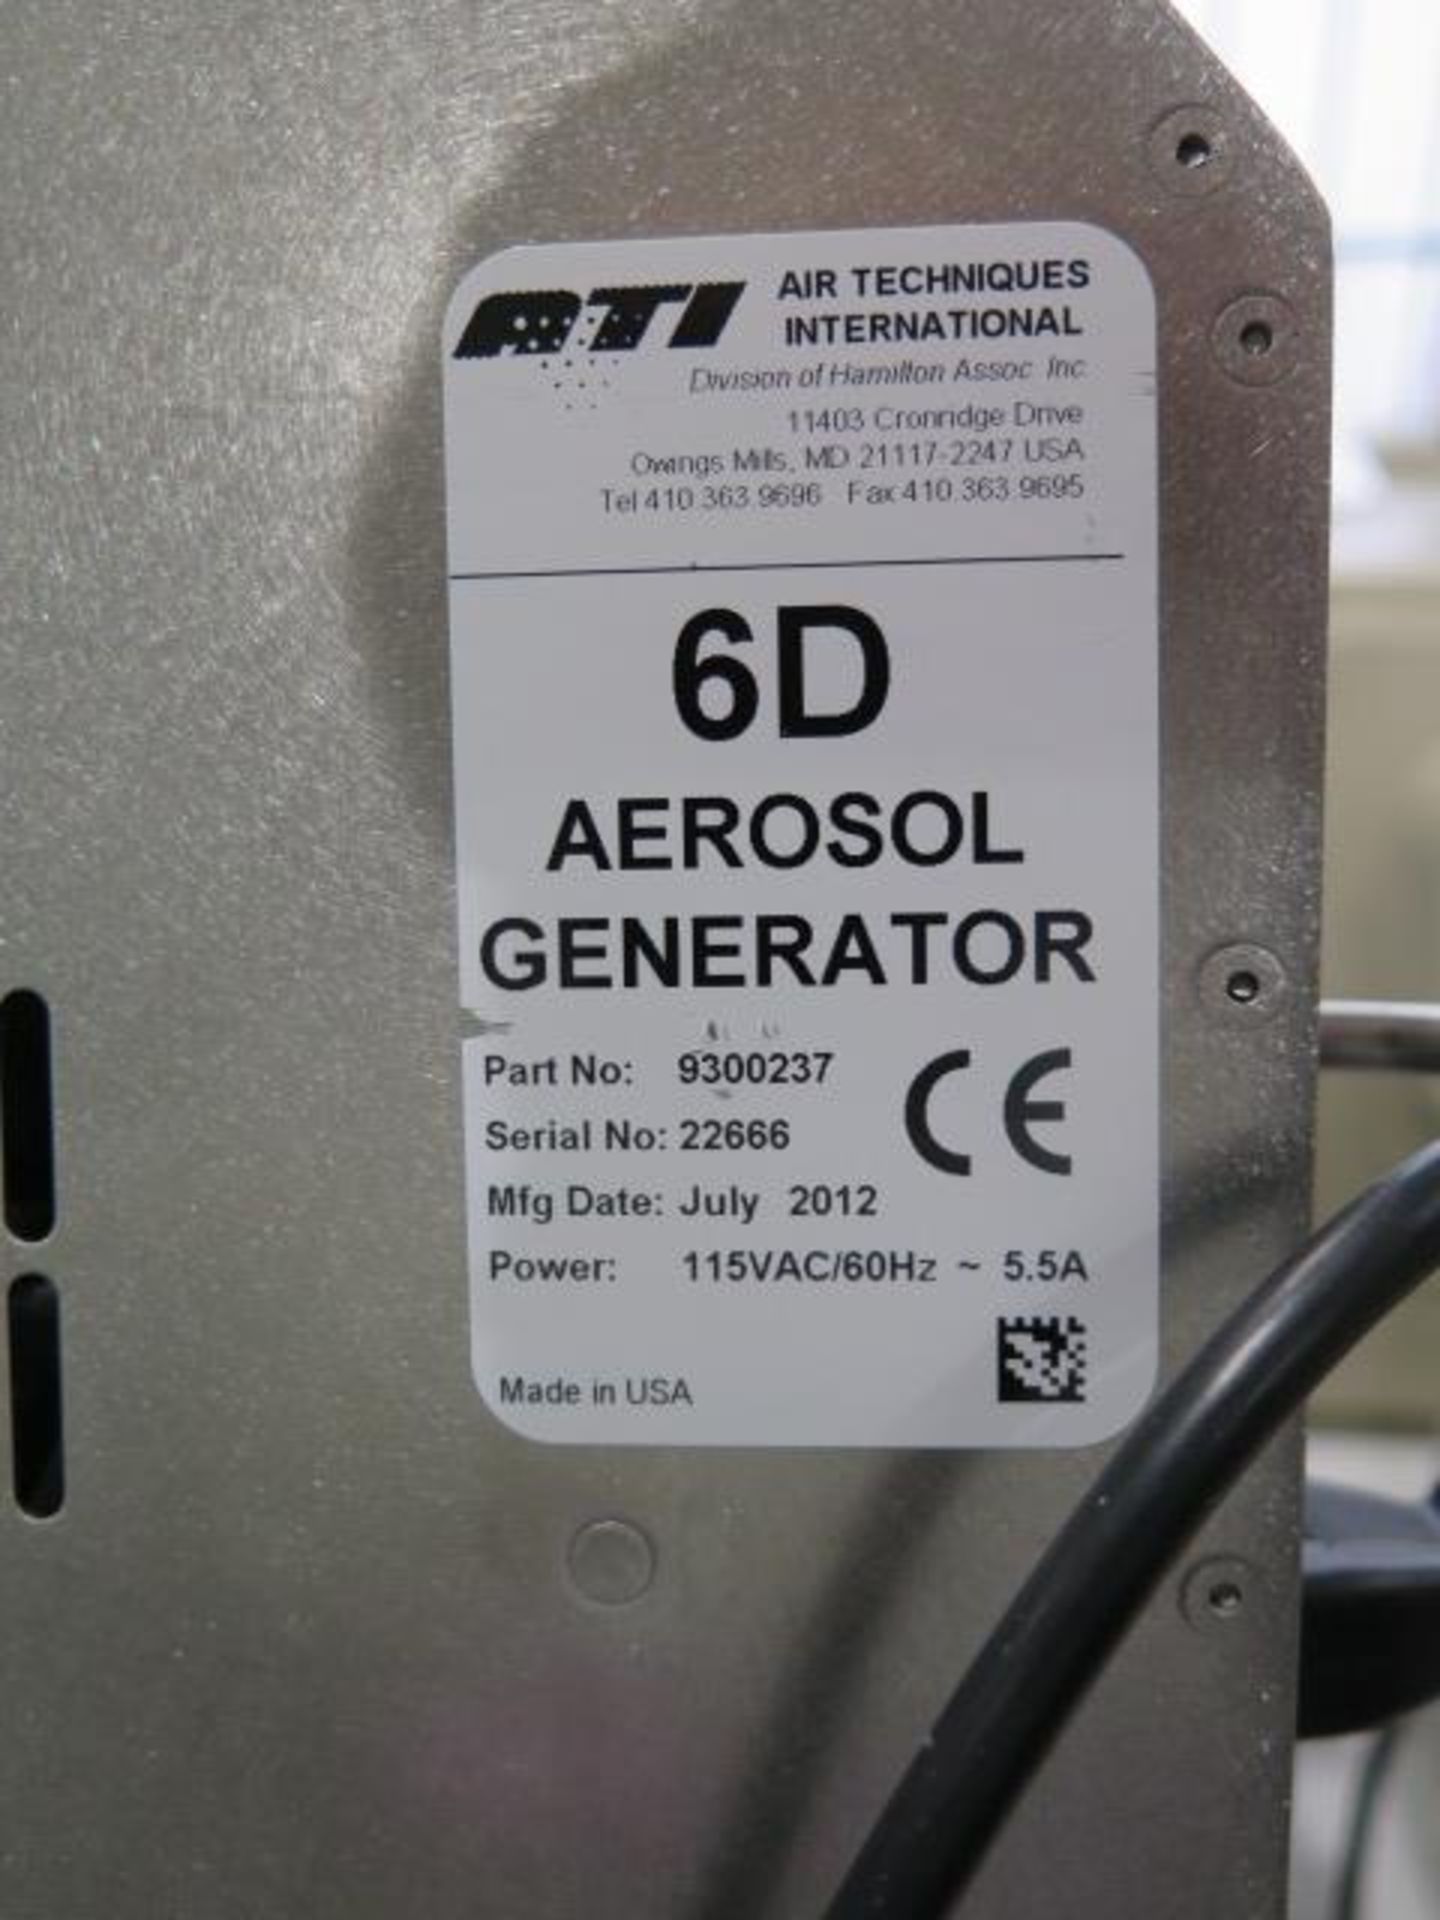 ATI Air Techniques International 6D Aerosol Generator (SOLD AS-IS - NO WARRANTY) - Image 9 of 9